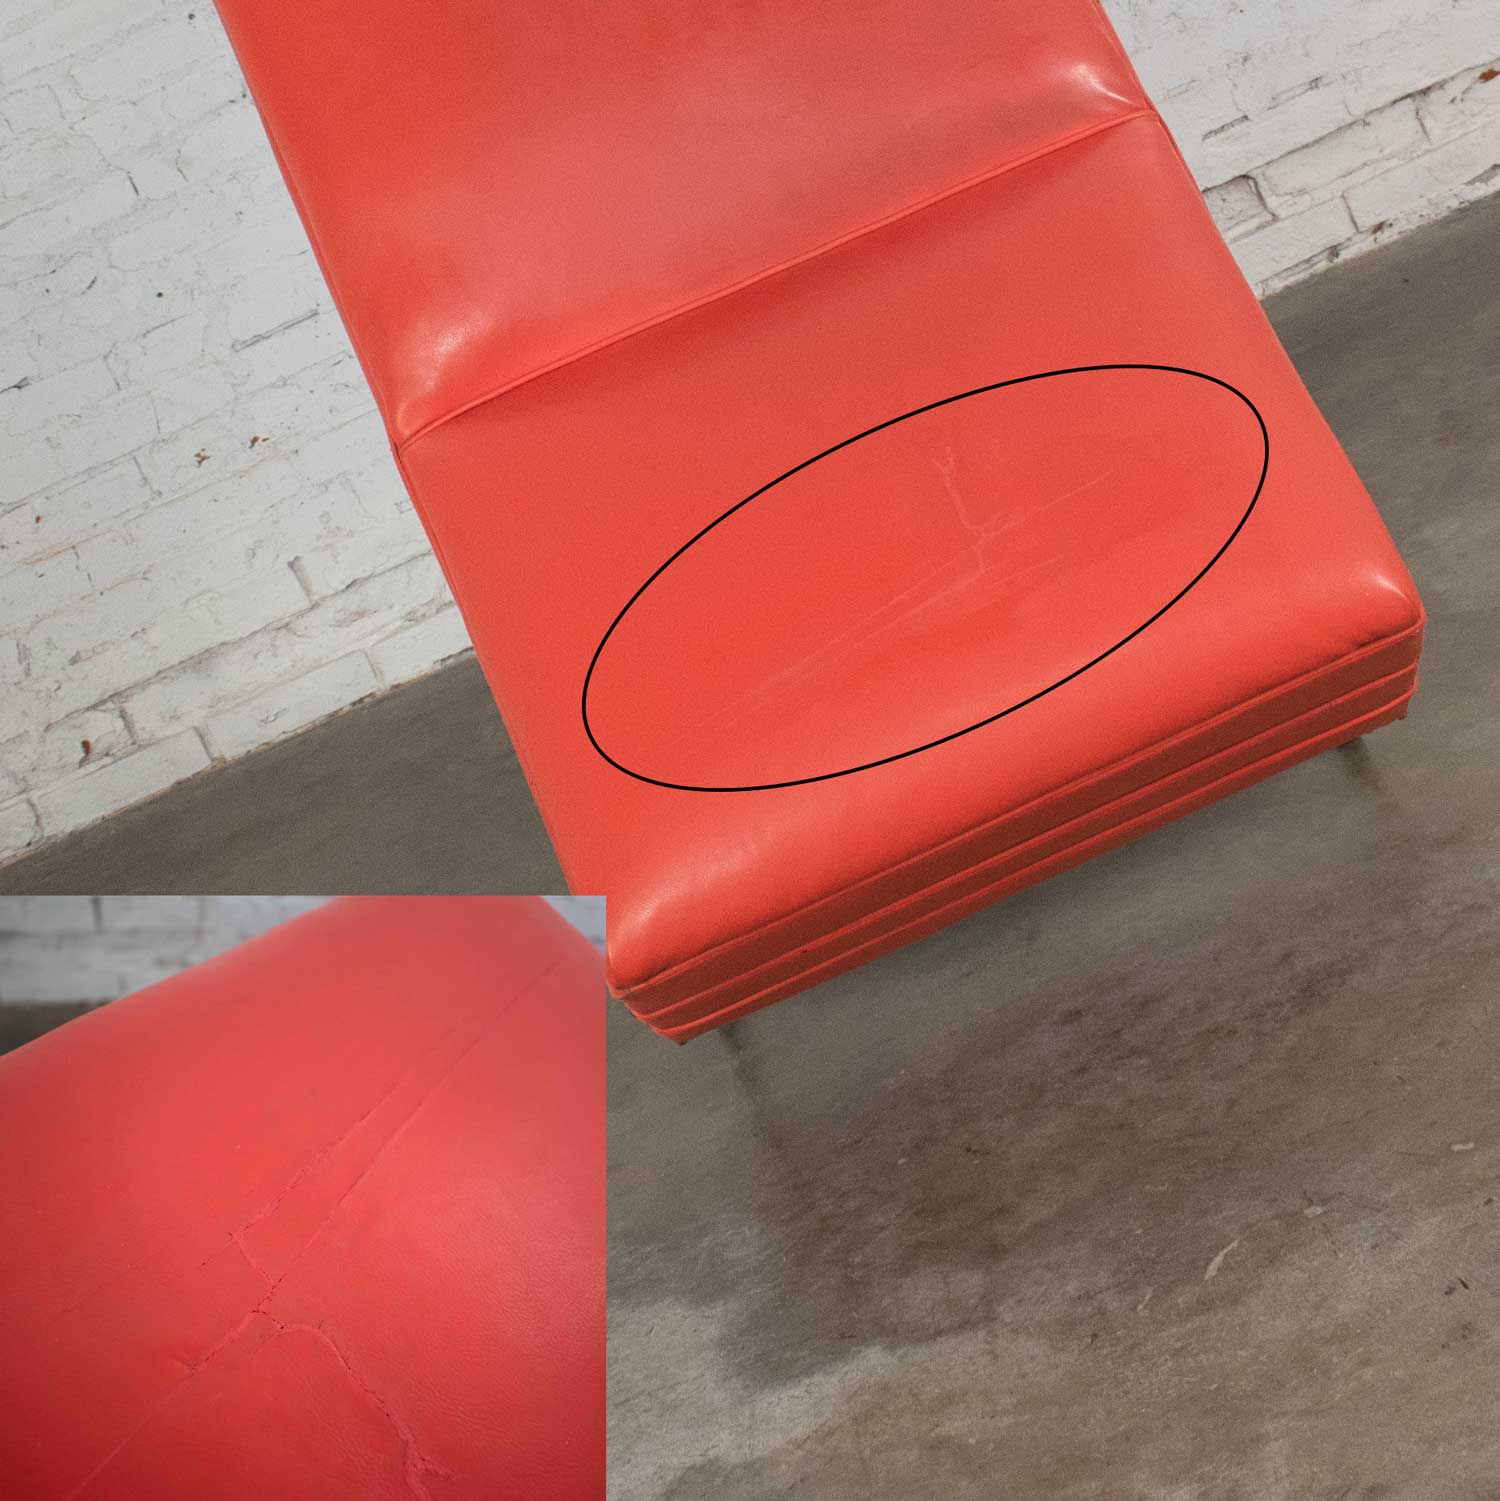 Mid Century Modern Chaise or Day Bed in Coral Vinyl Faux Leather with Aluminum Legs